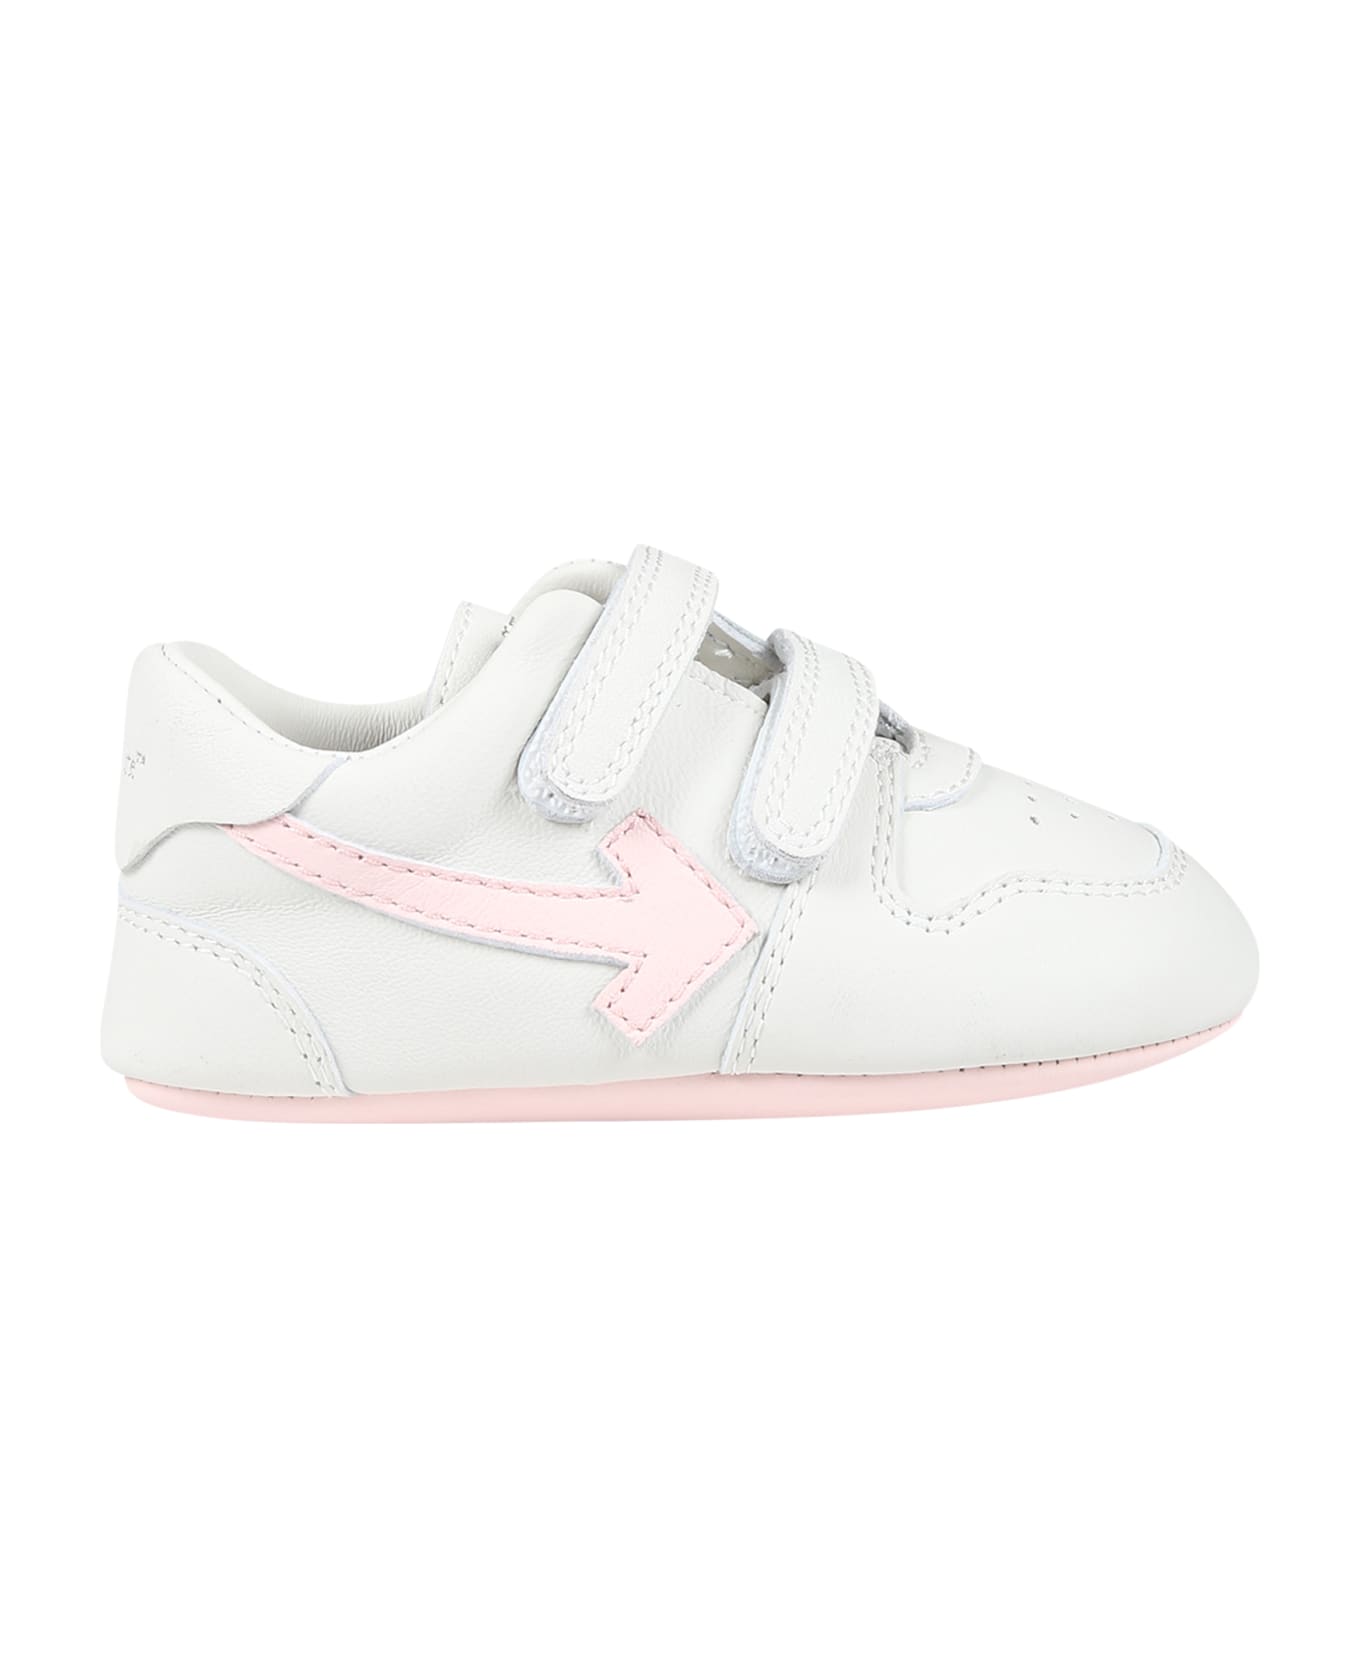 Off-White Grey Sneaker For Baby Girl With Arrows - White